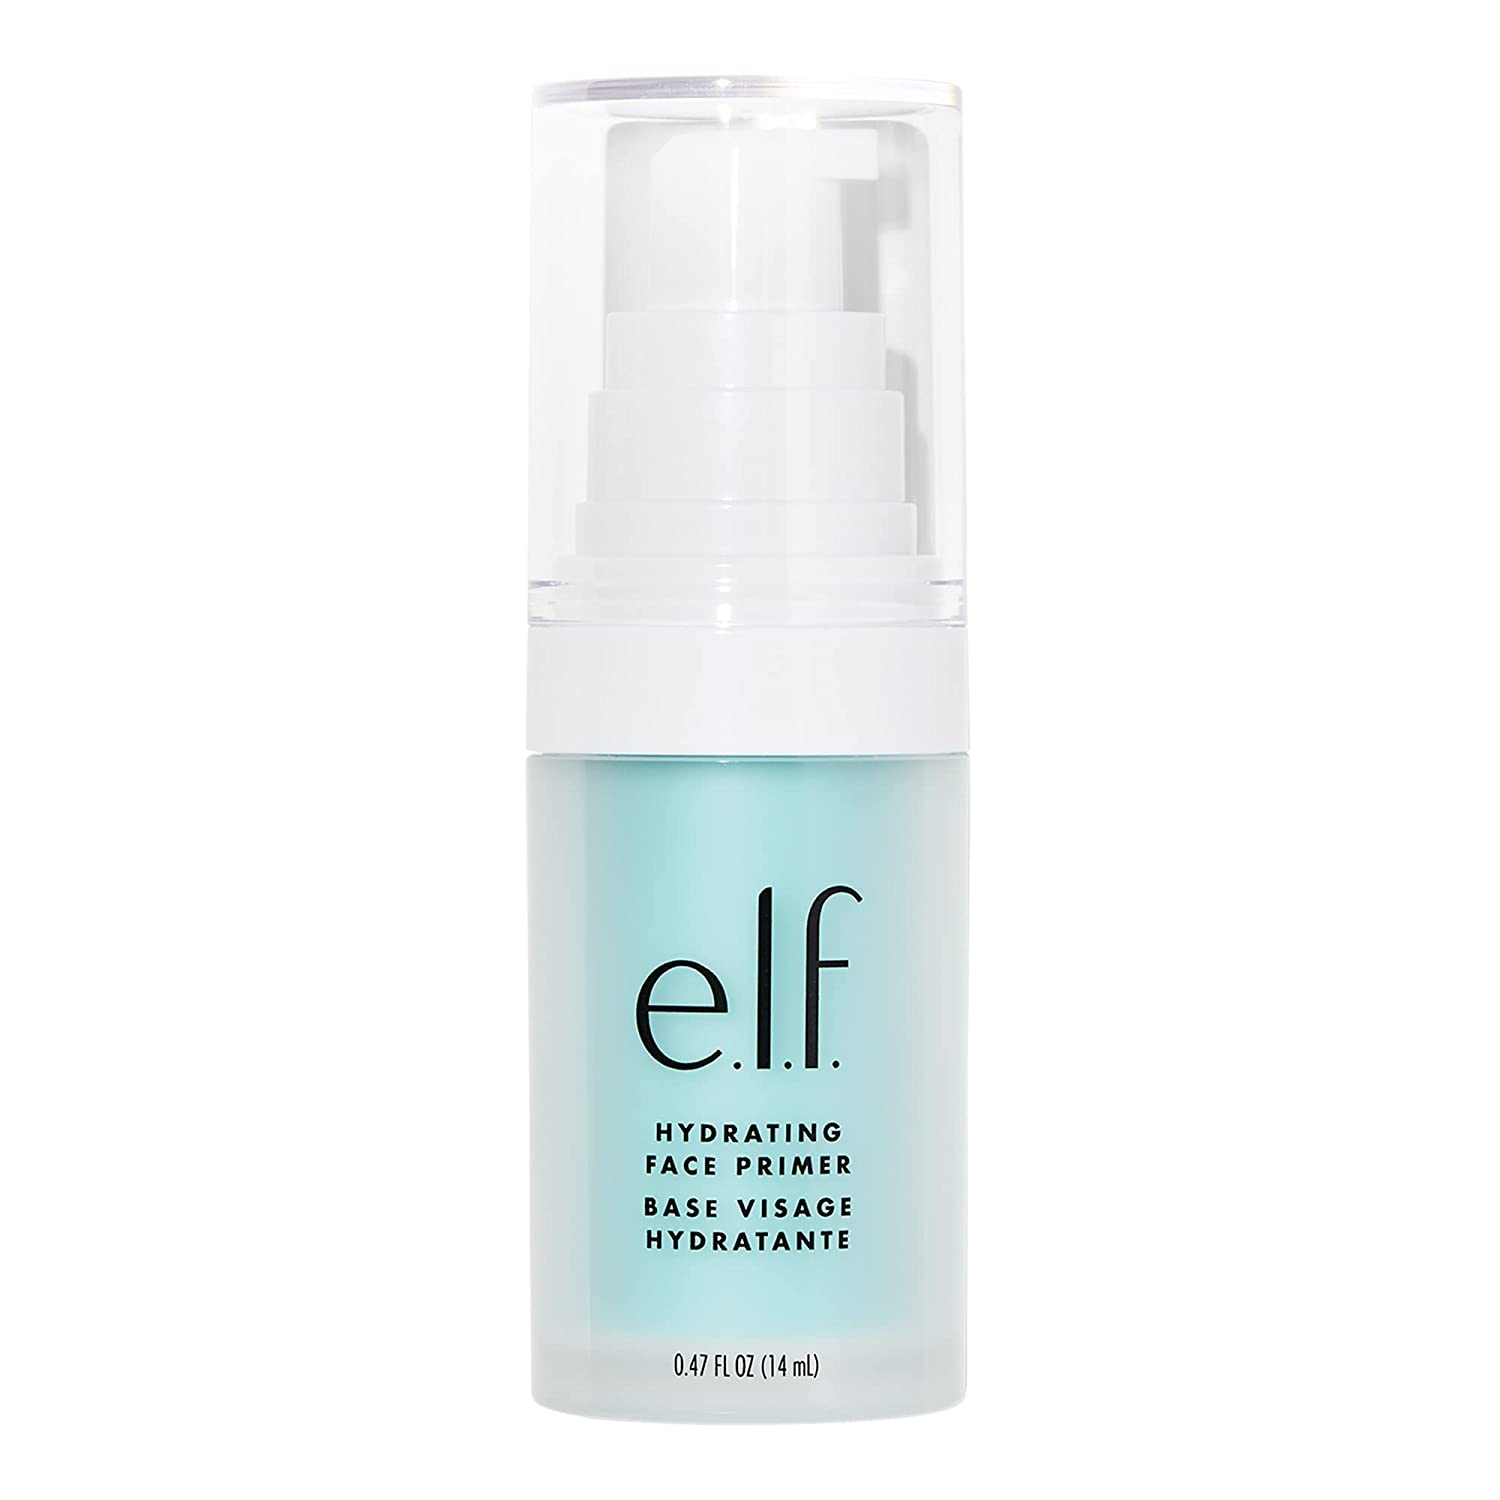 e.l.f. Hydrating Face Primer is one of the best silicone based primers that is infused with grape and vitamins A, C, & E to help boost complexion and hydrate your skin. 